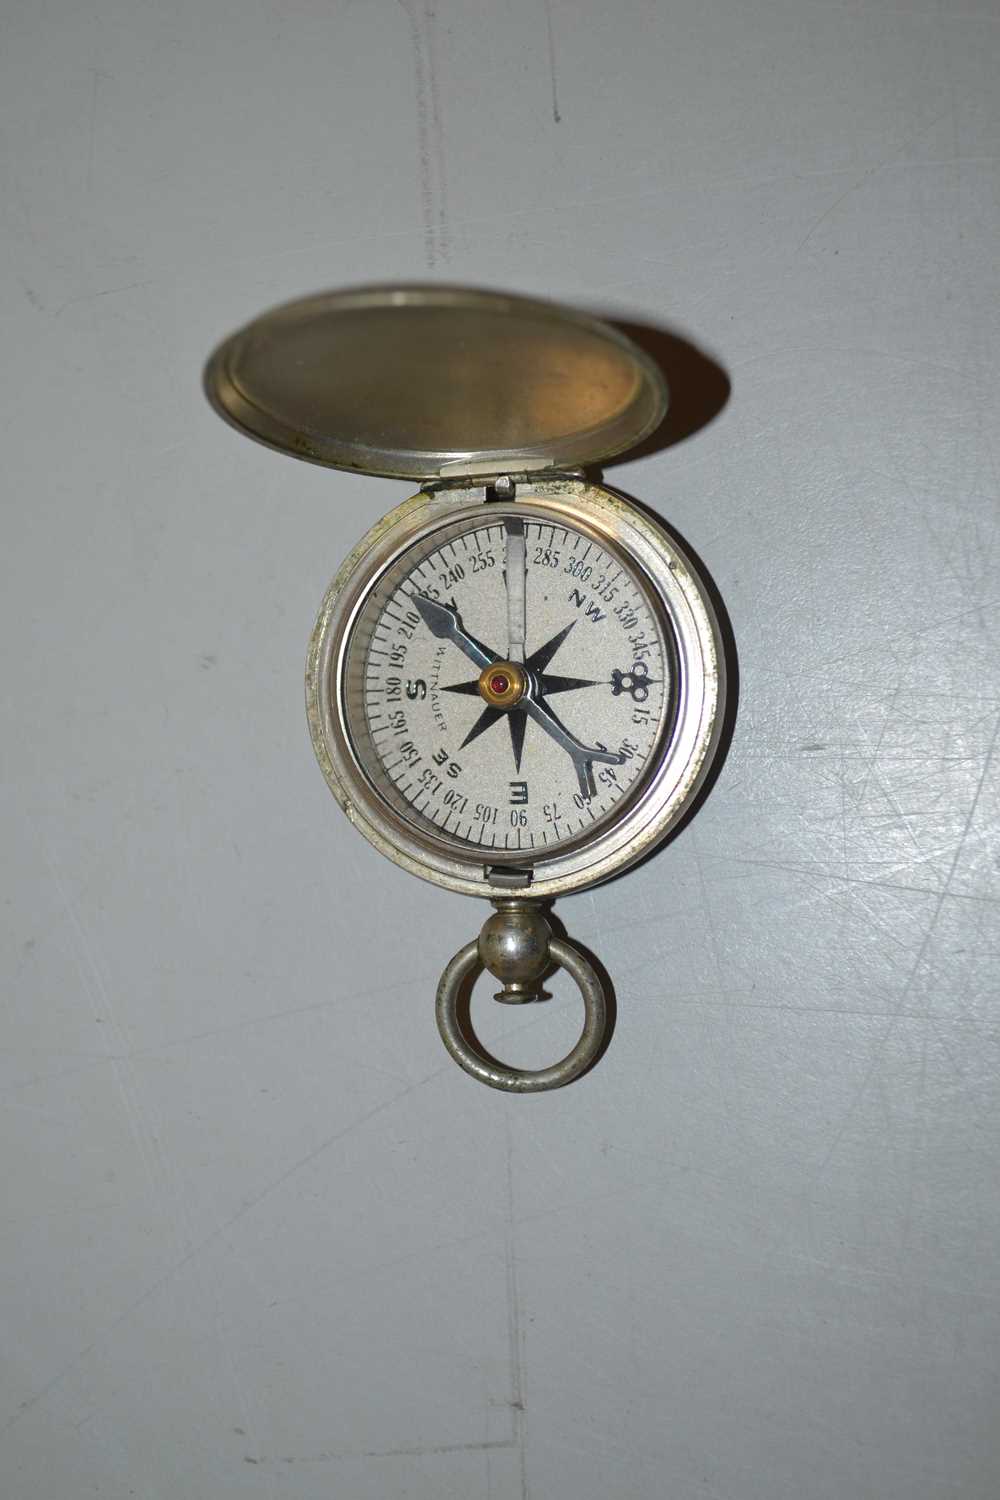 Pocket compass, in base metal case marked US